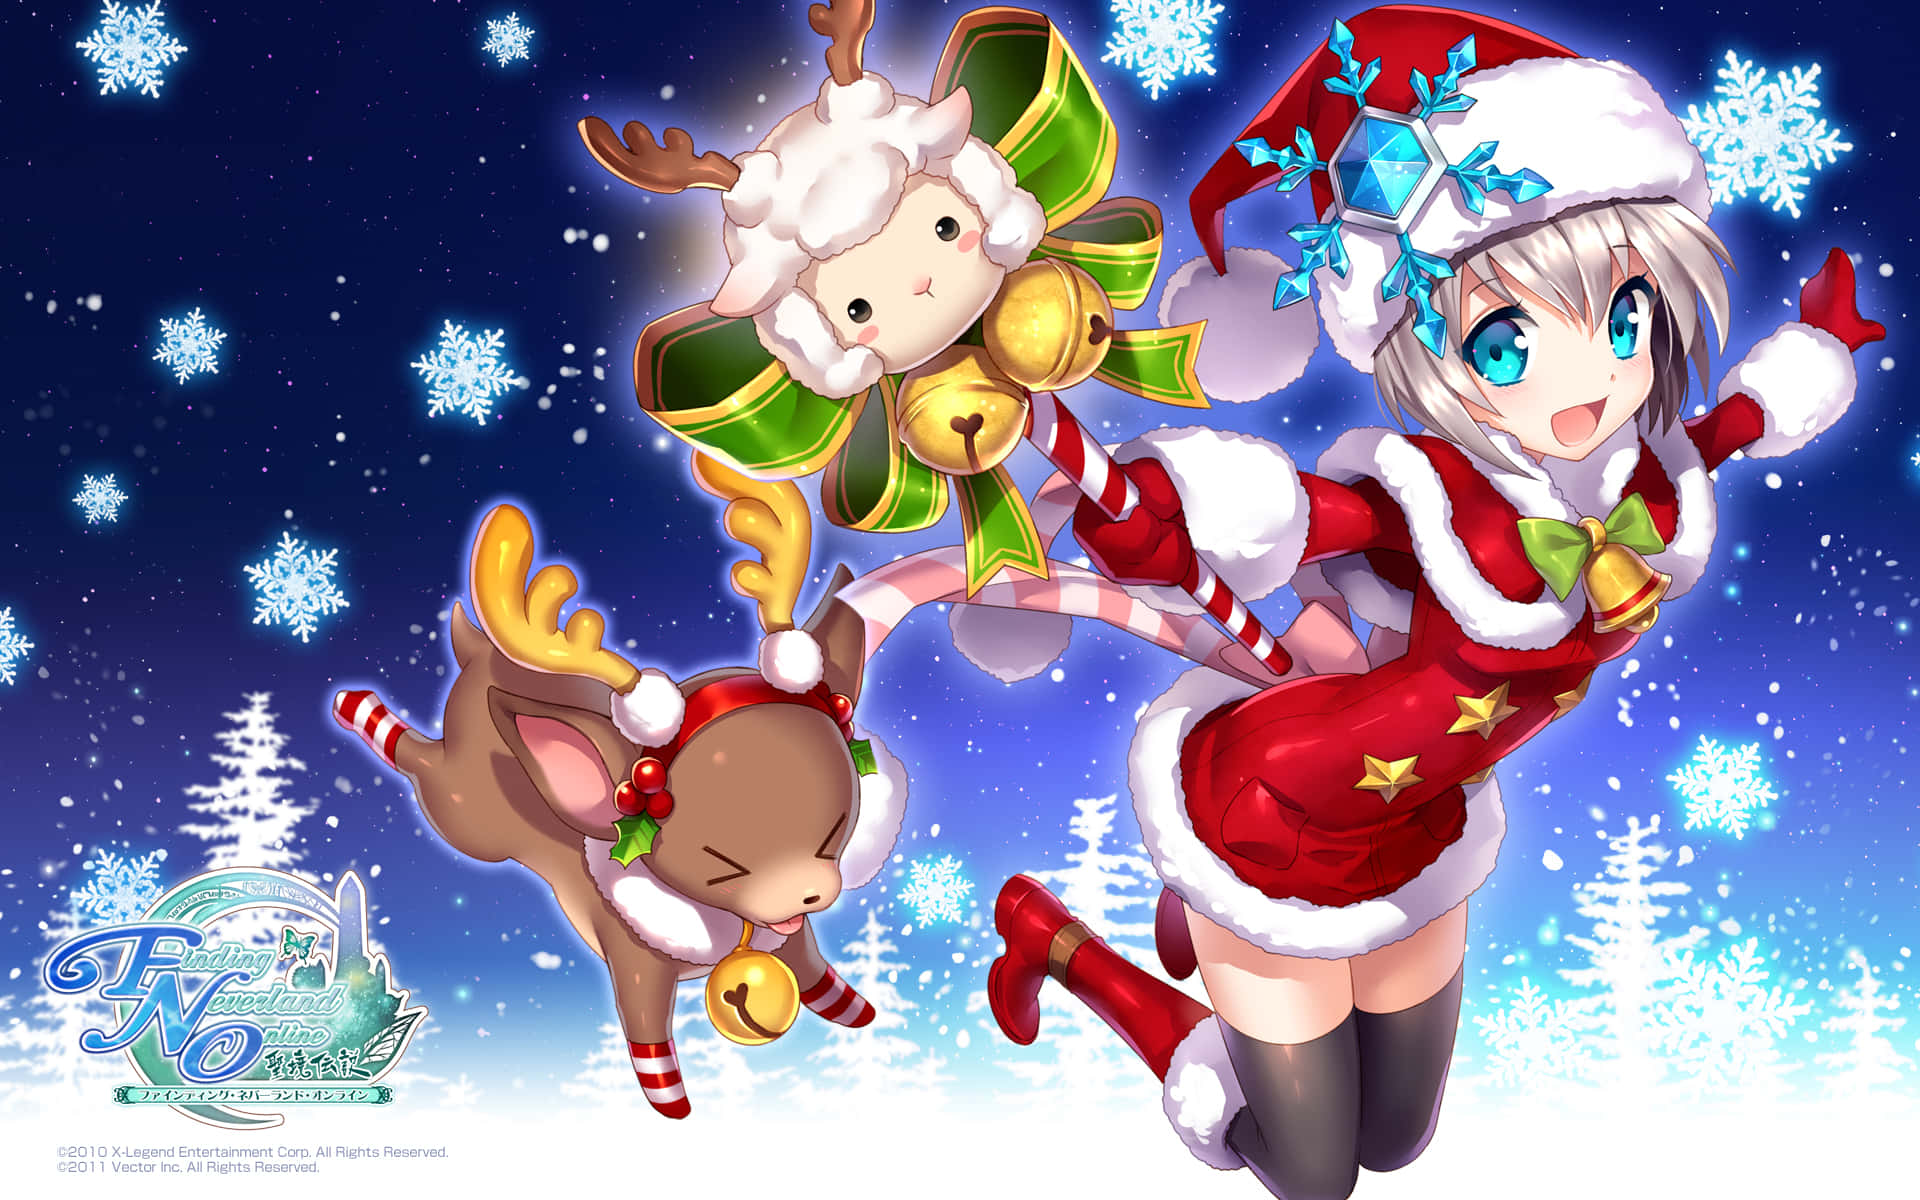 Make holiday memories with friends and anime!